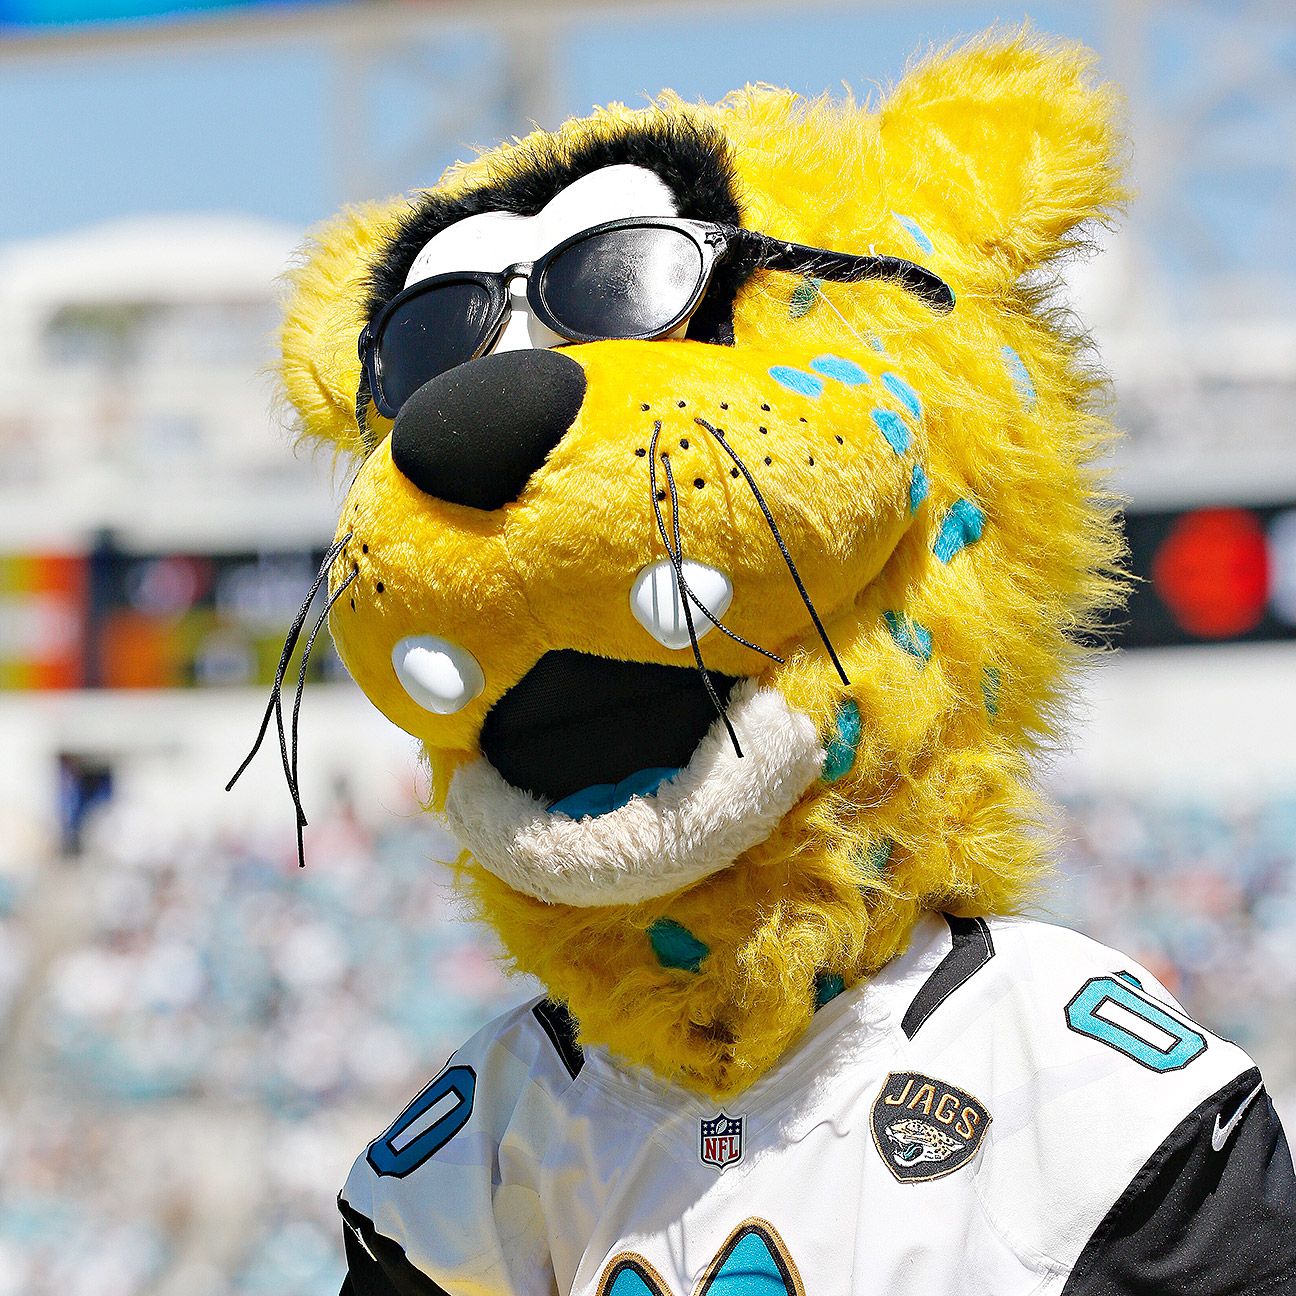 Mascot brings new meaning to scratch golfer - NFL Nation - ESPN.co.uk